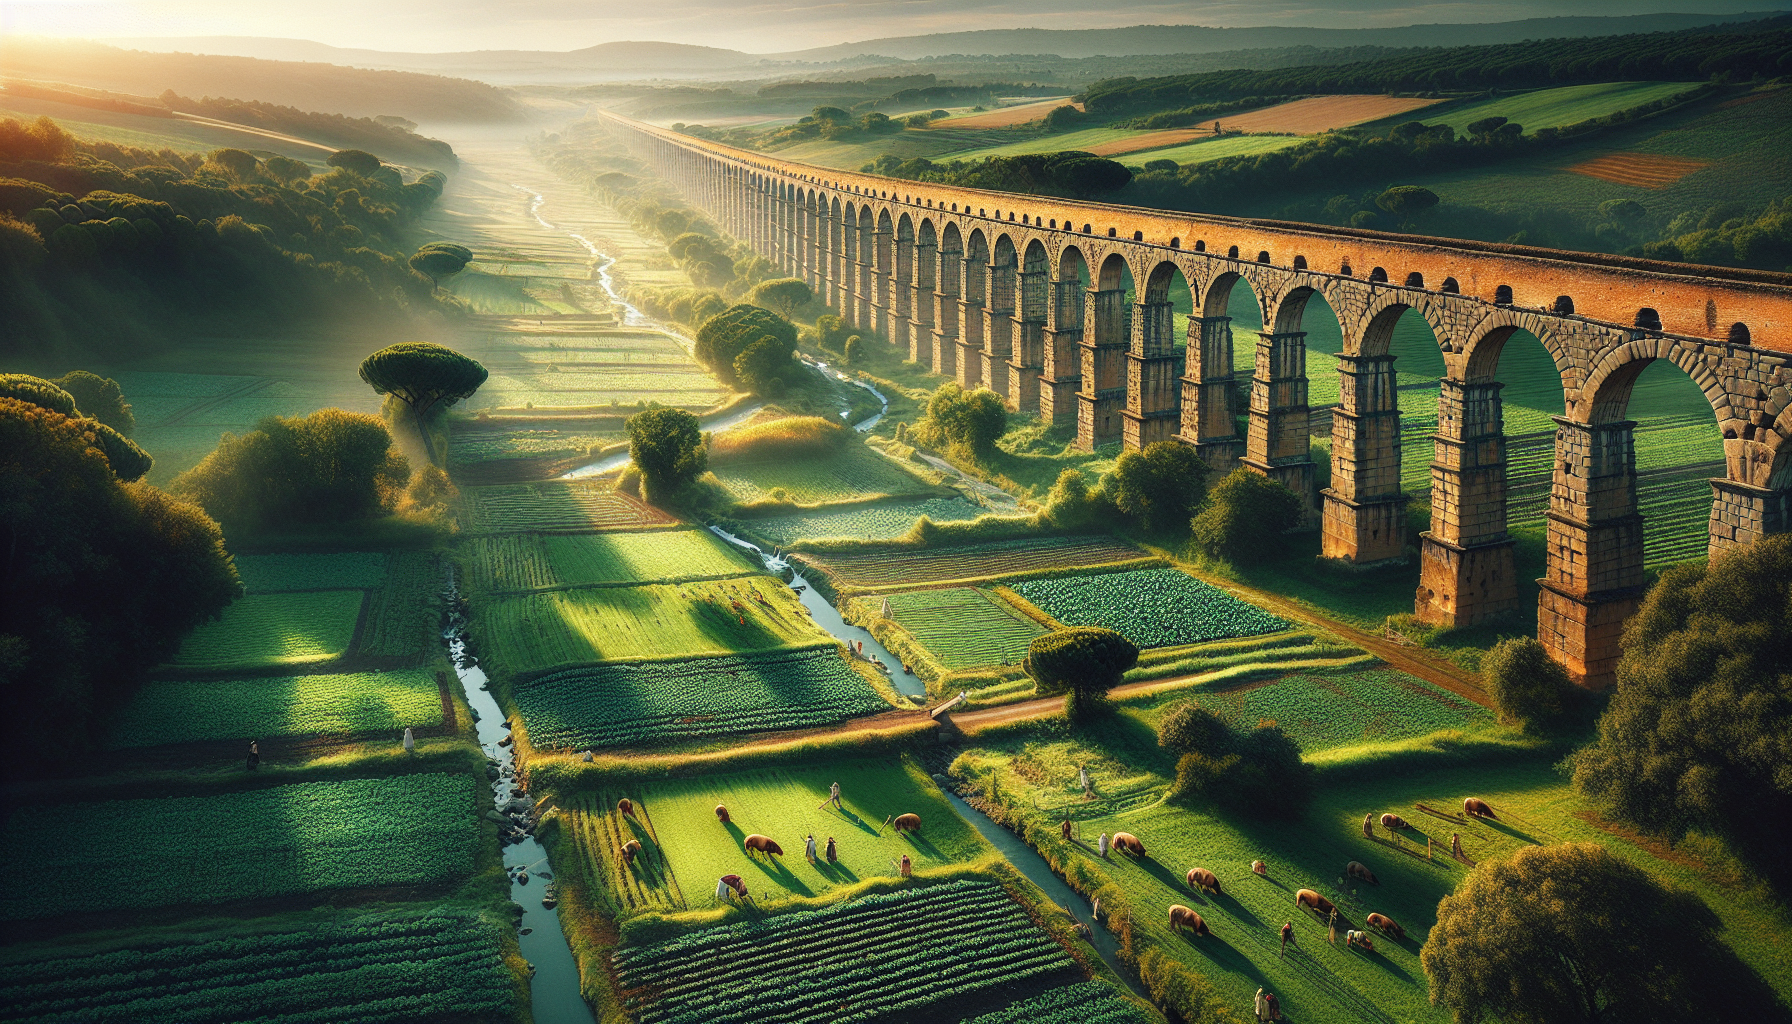 Illustration of Roman aqueducts supporting farming and irrigation